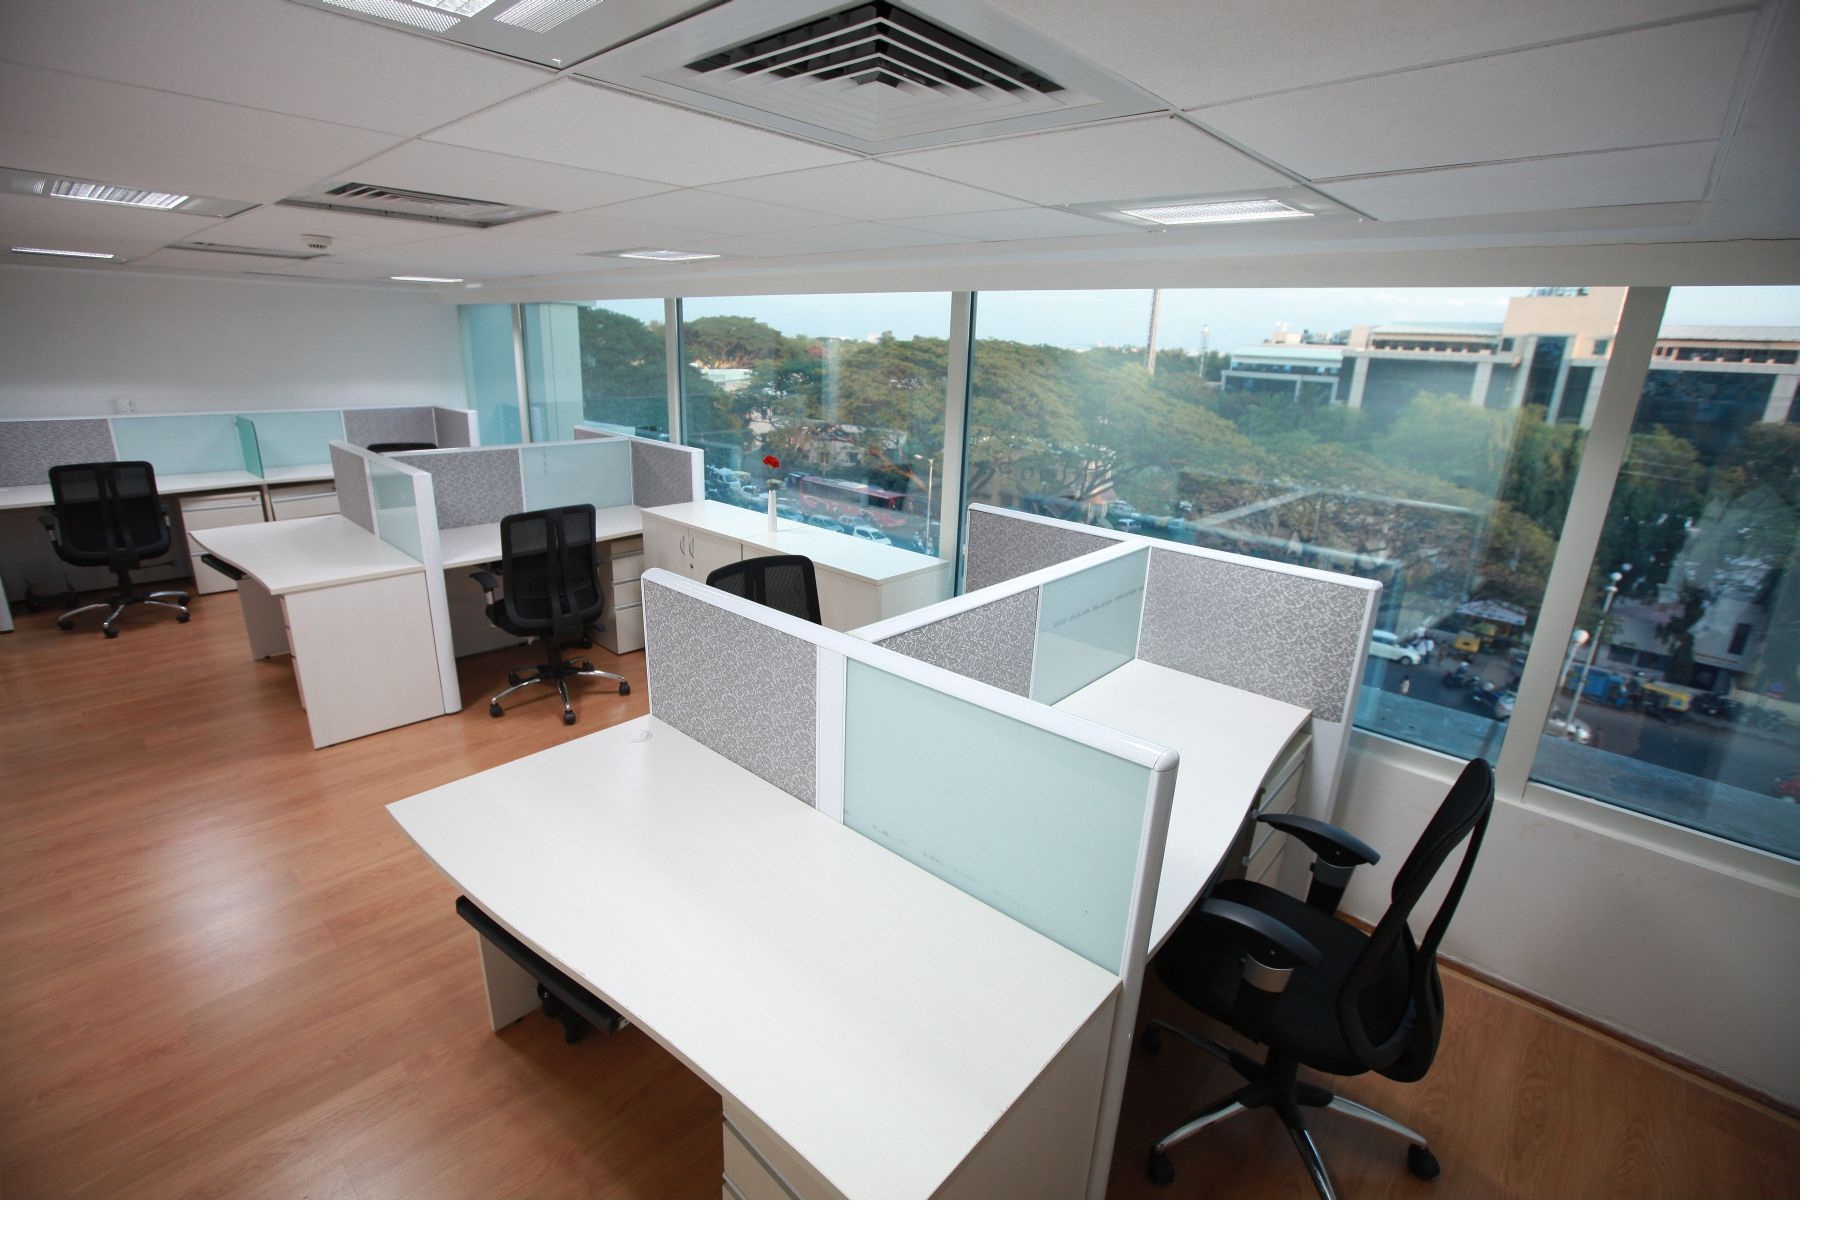 Our serviced Offices are designed to get your business right